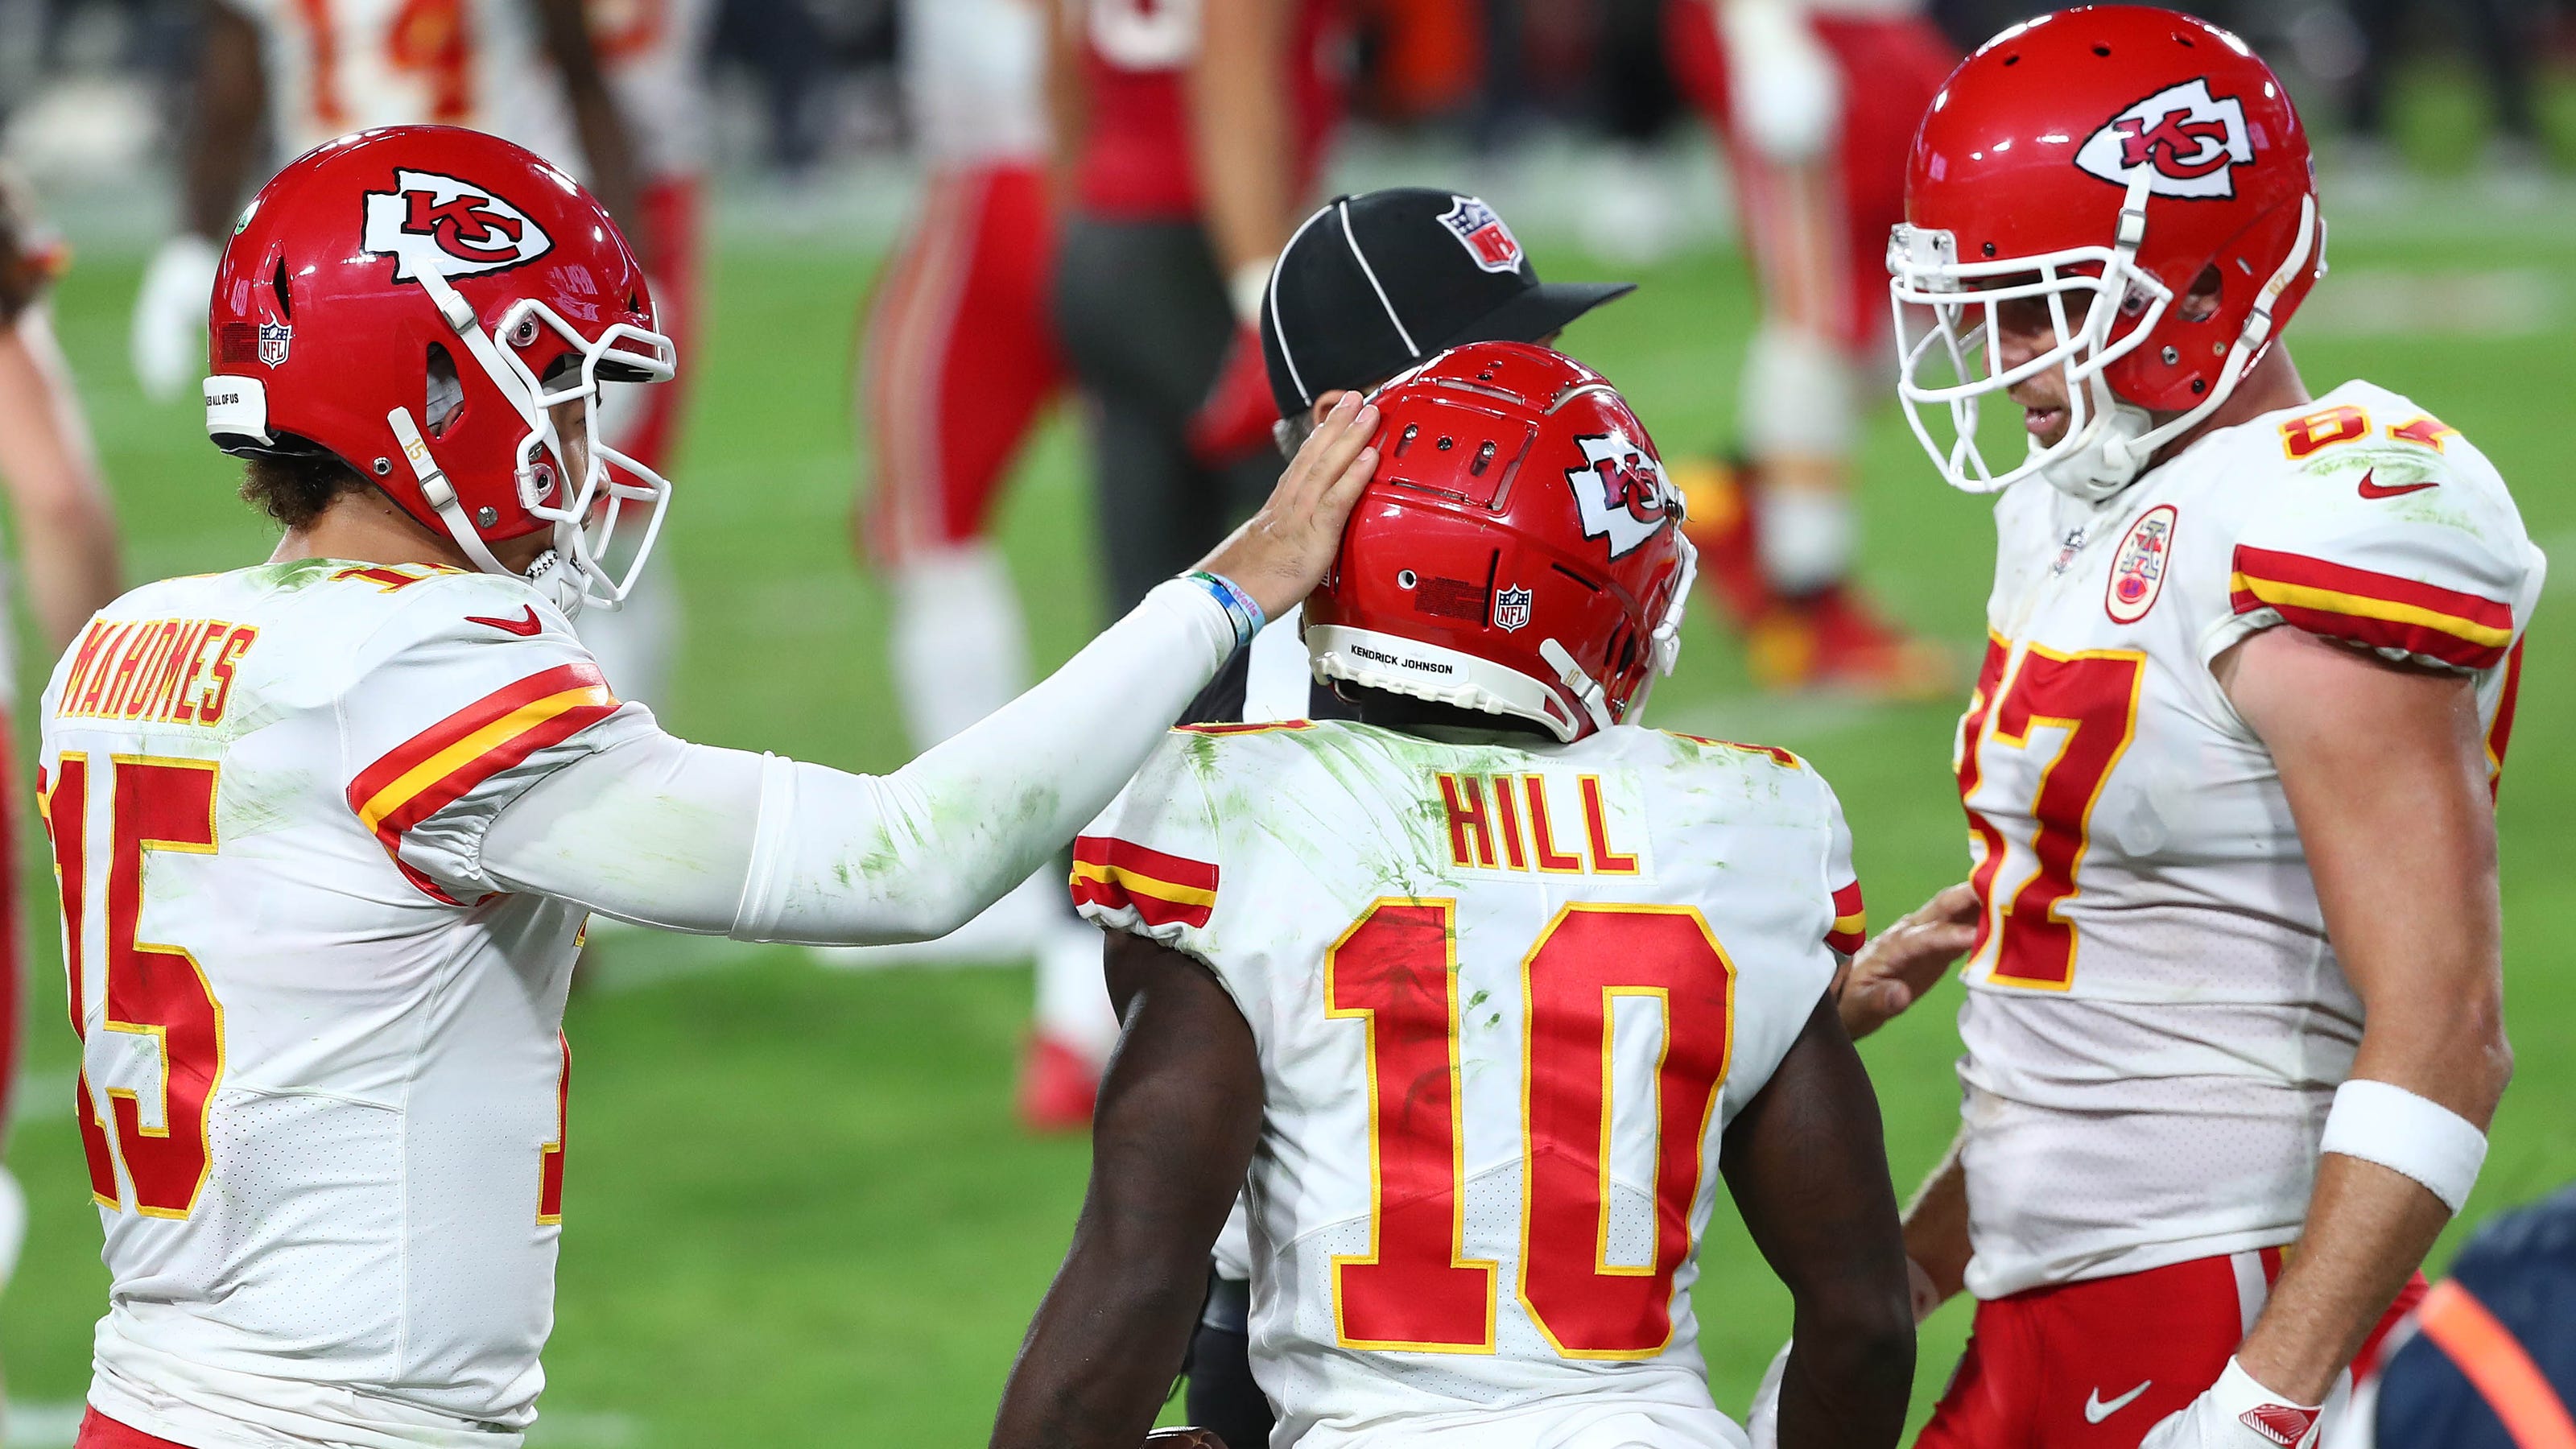 2021 Pro Bowl rosters Chiefs, Packers, Ravens, Seahawks lead way